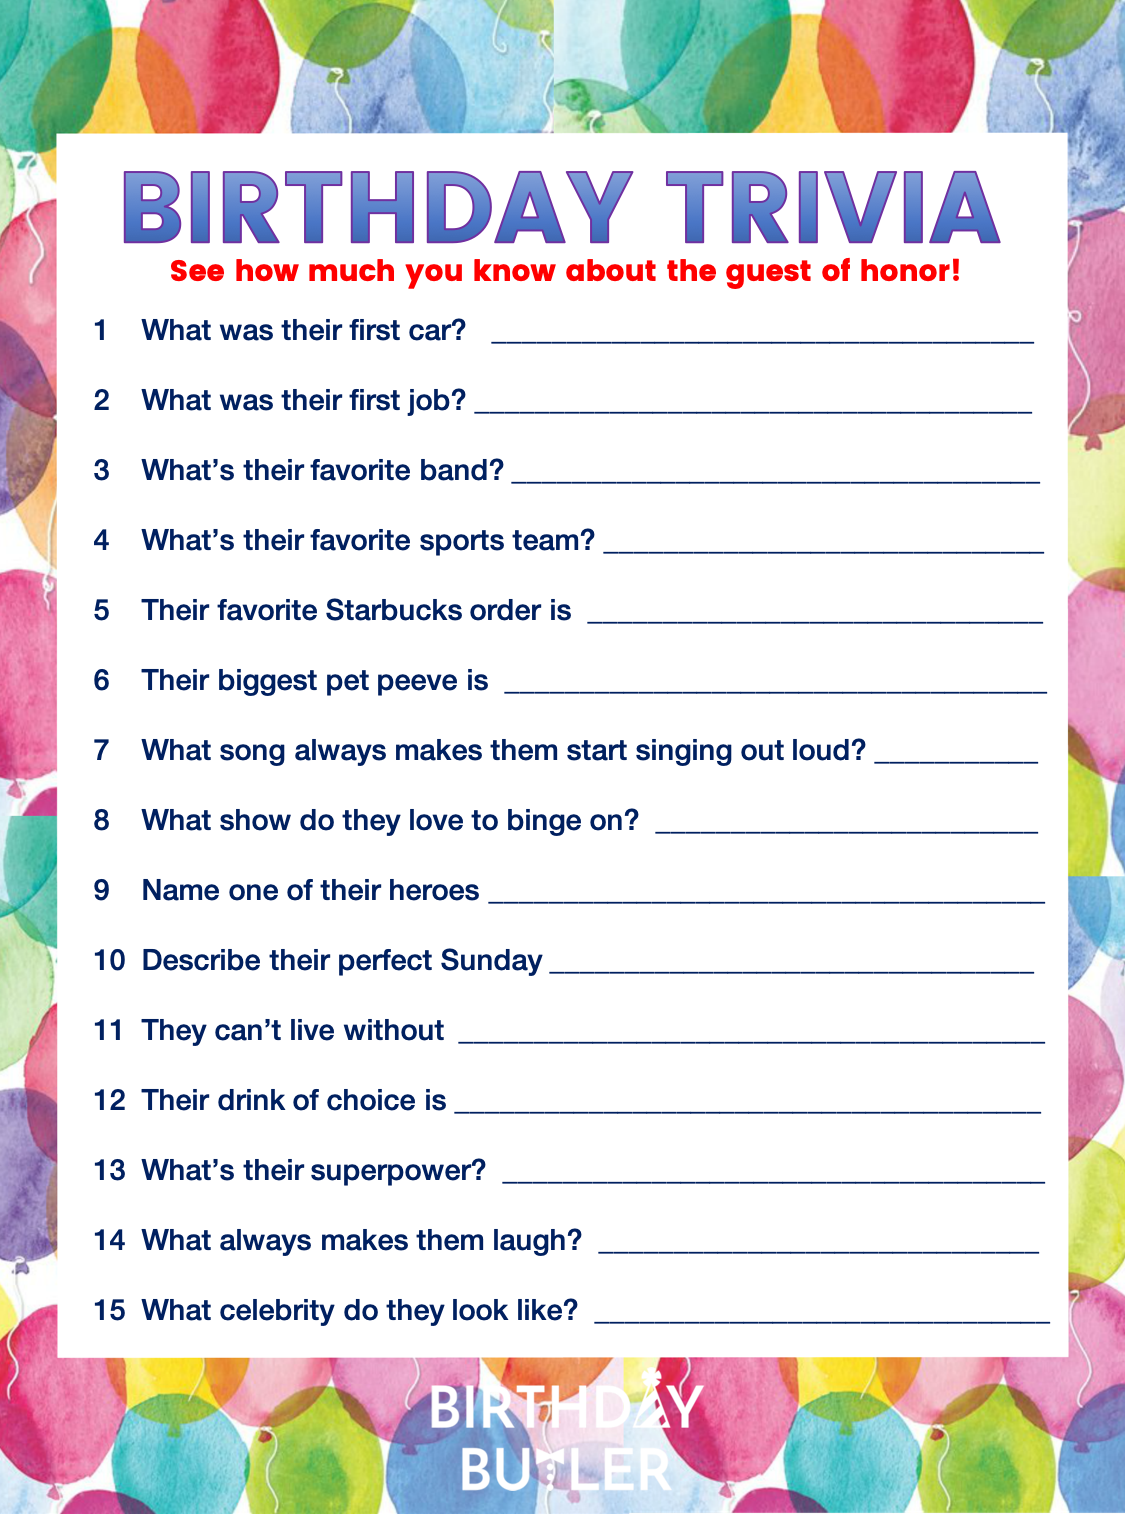 add-oomph-to-your-party-with-birthday-trivia-birthday-butler